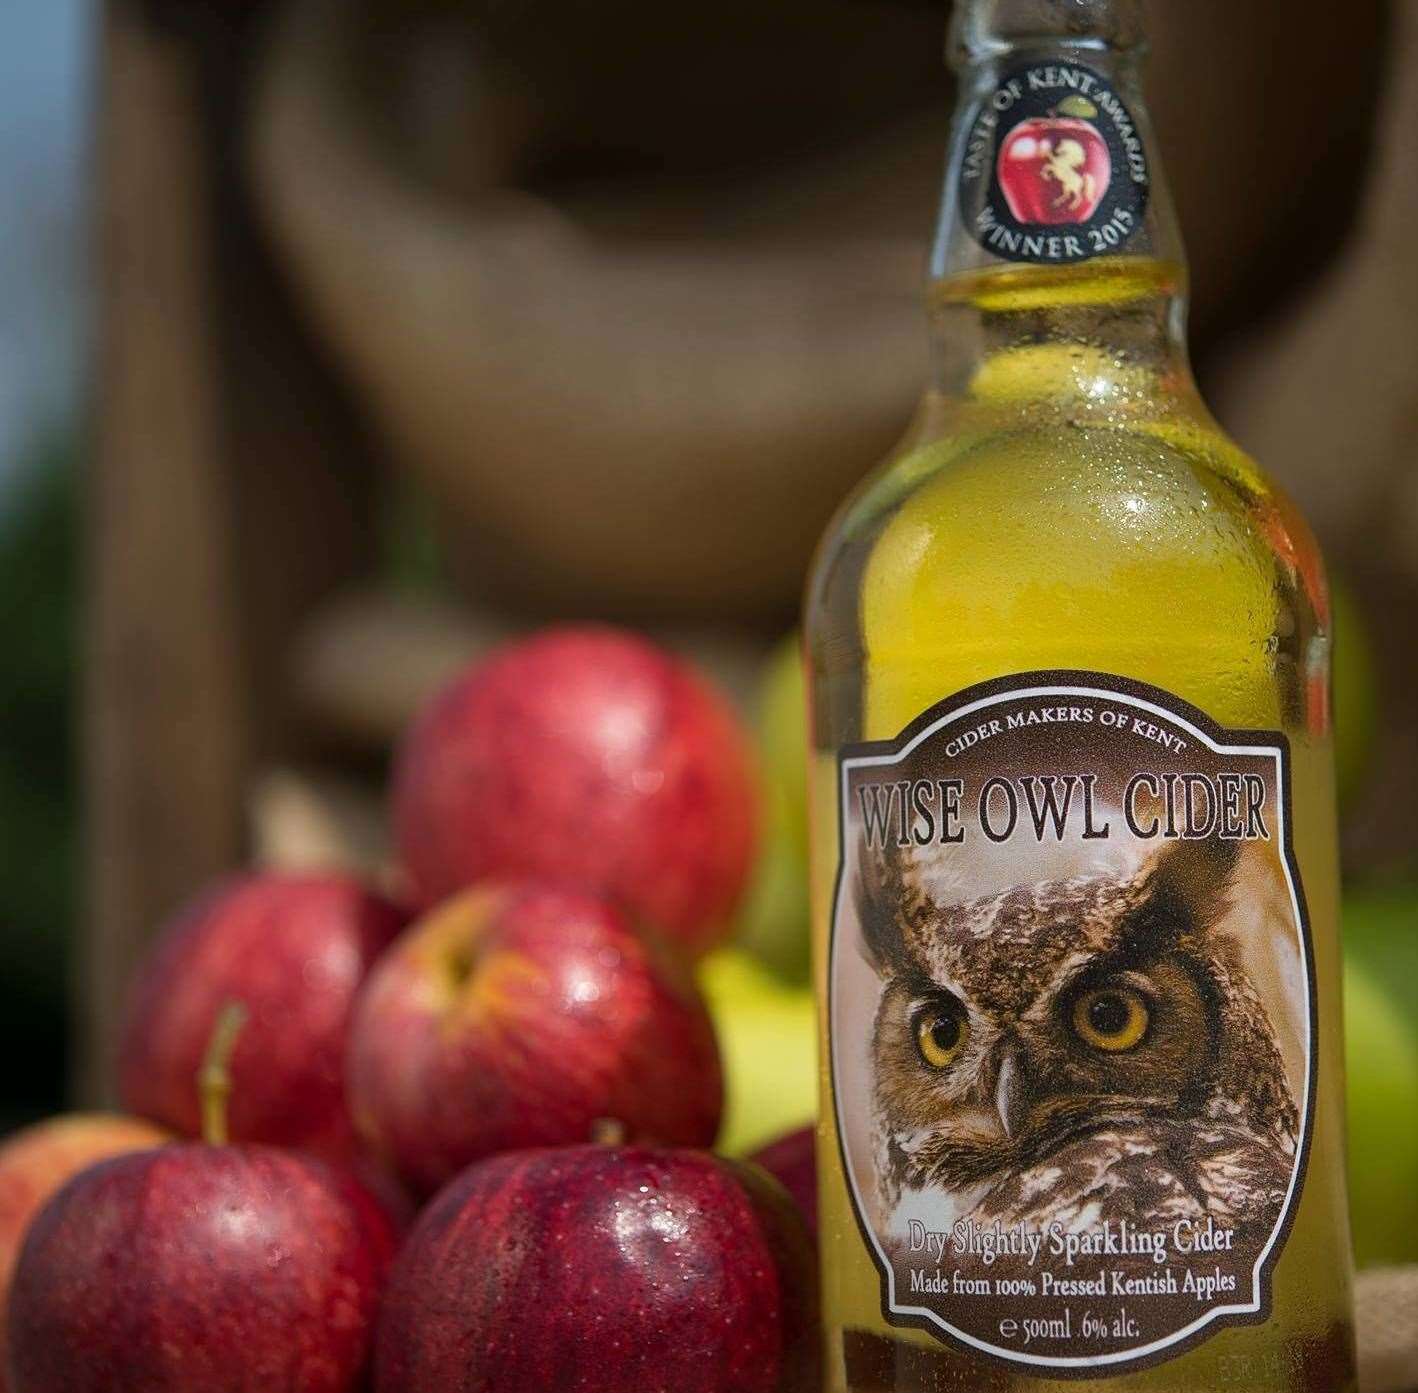 Wise Owl Cider, one of the offerings at the first Sausage and Cider festival by Zoom Events in Ashford